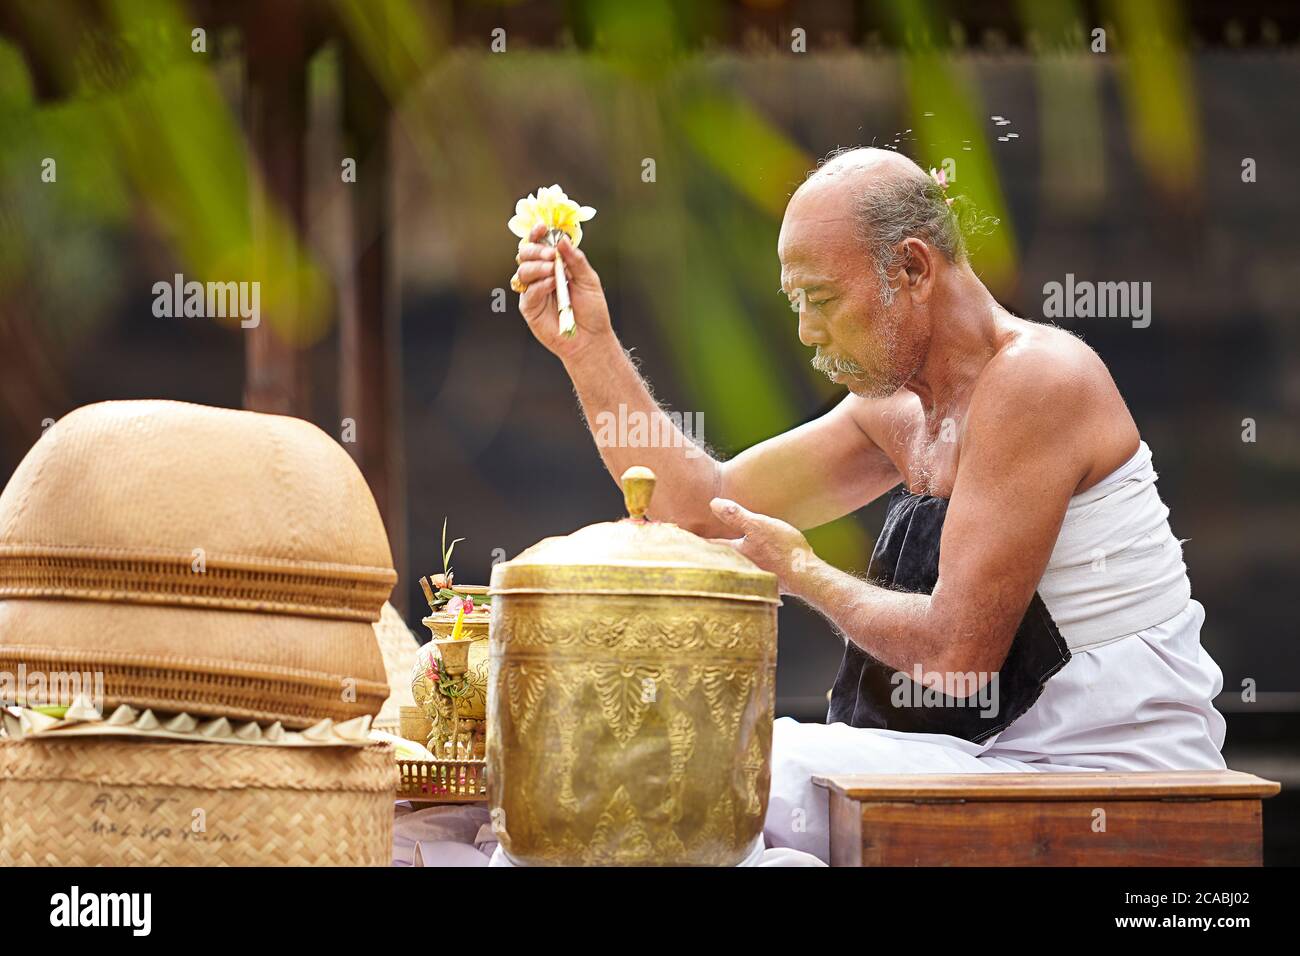 A leader of Balinese Hindu religious ceremonies praying in a ritual ceremony Stock Photo